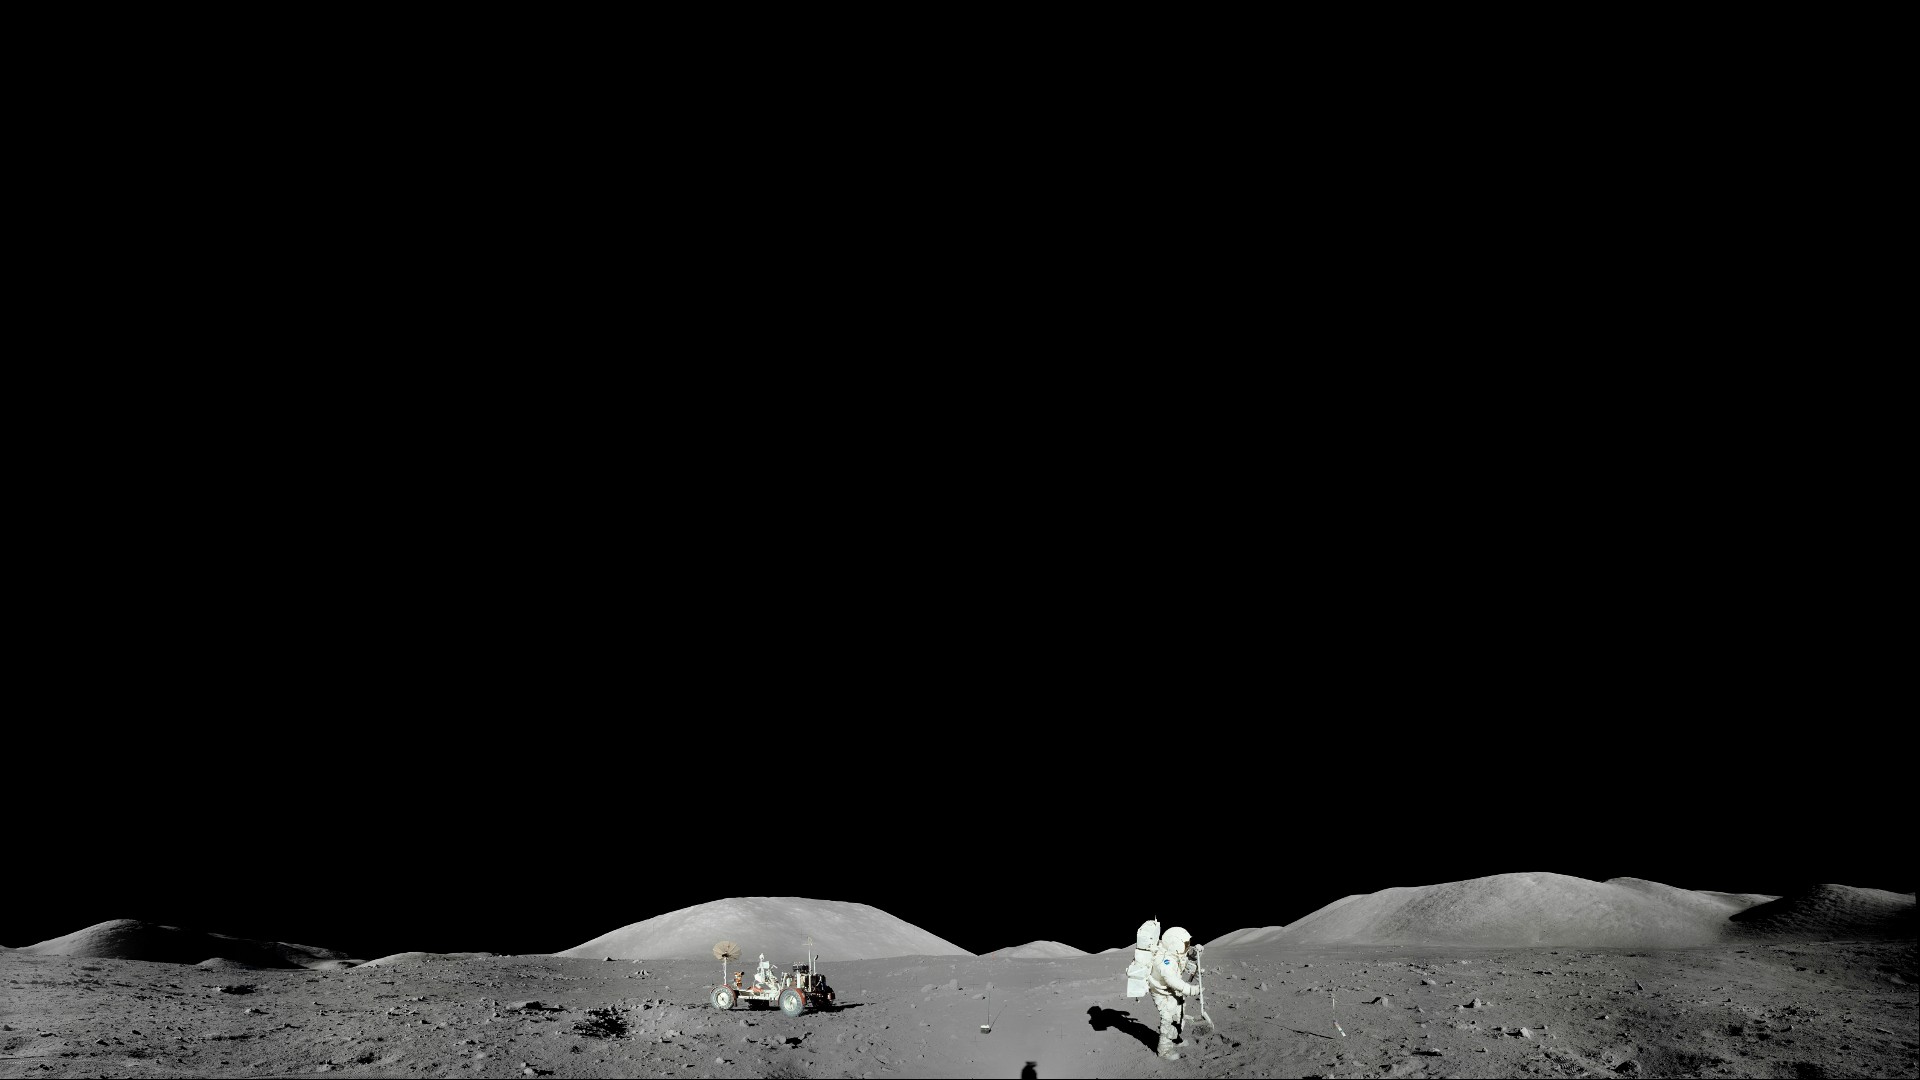 General 1920x1080 Moon space simple background astronaut